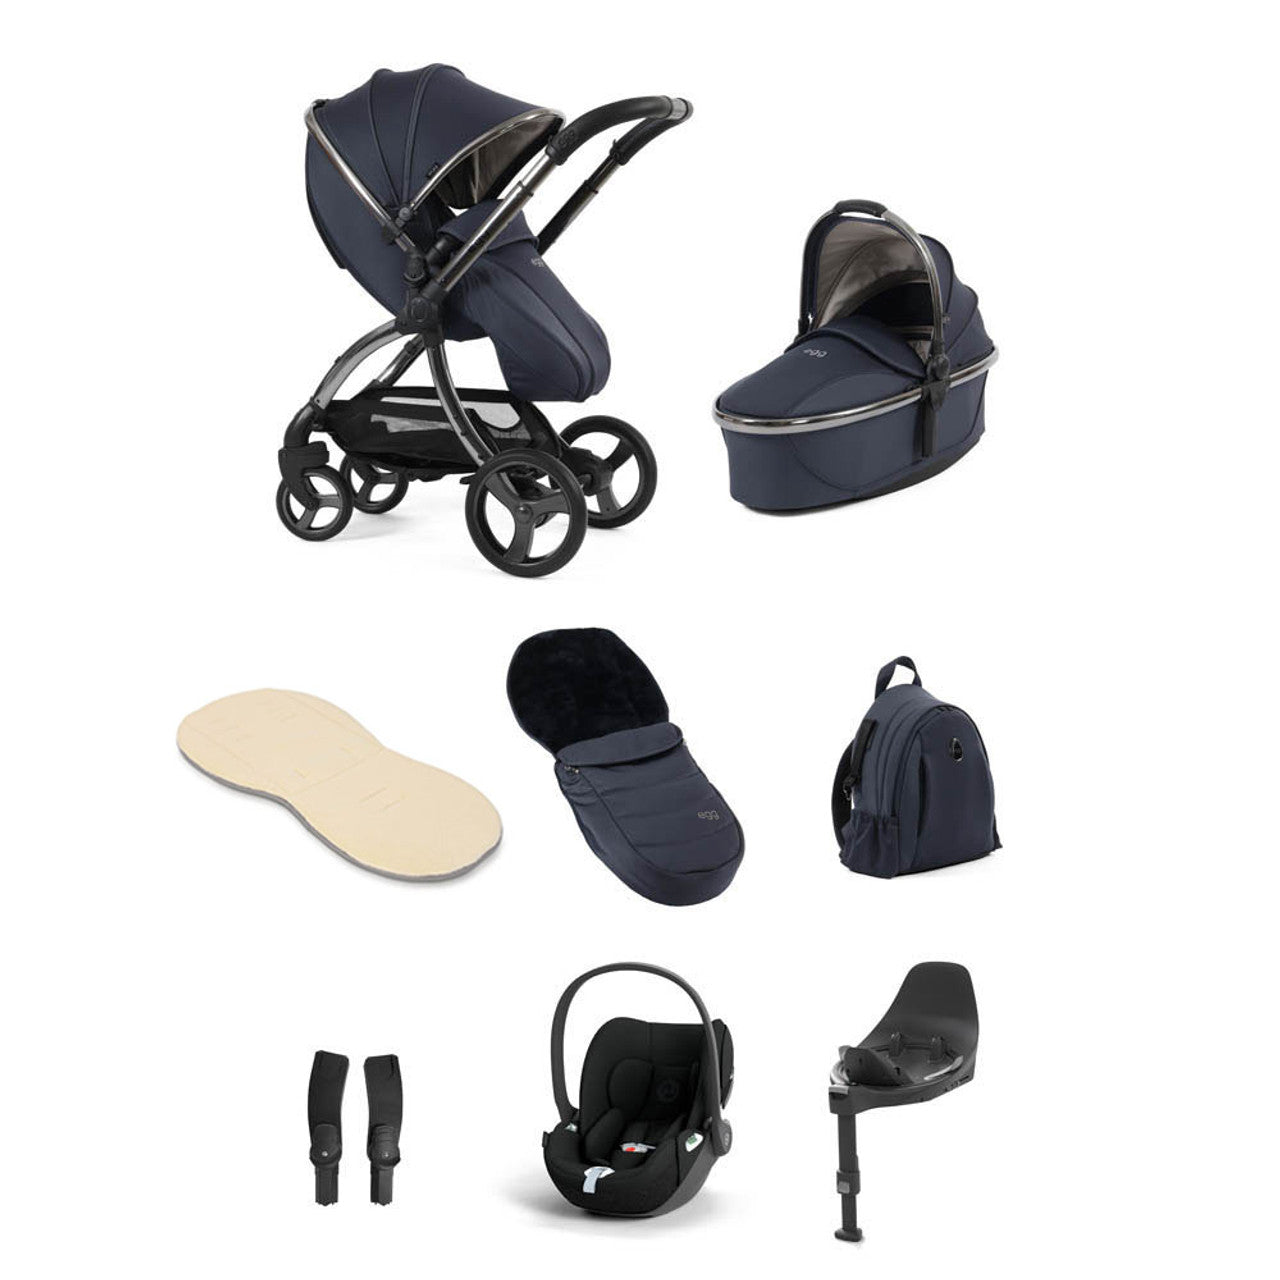 Egg® 3 Luxury Cloud T i-Size Travel System Bundle - Celestial -  | For Your Little One